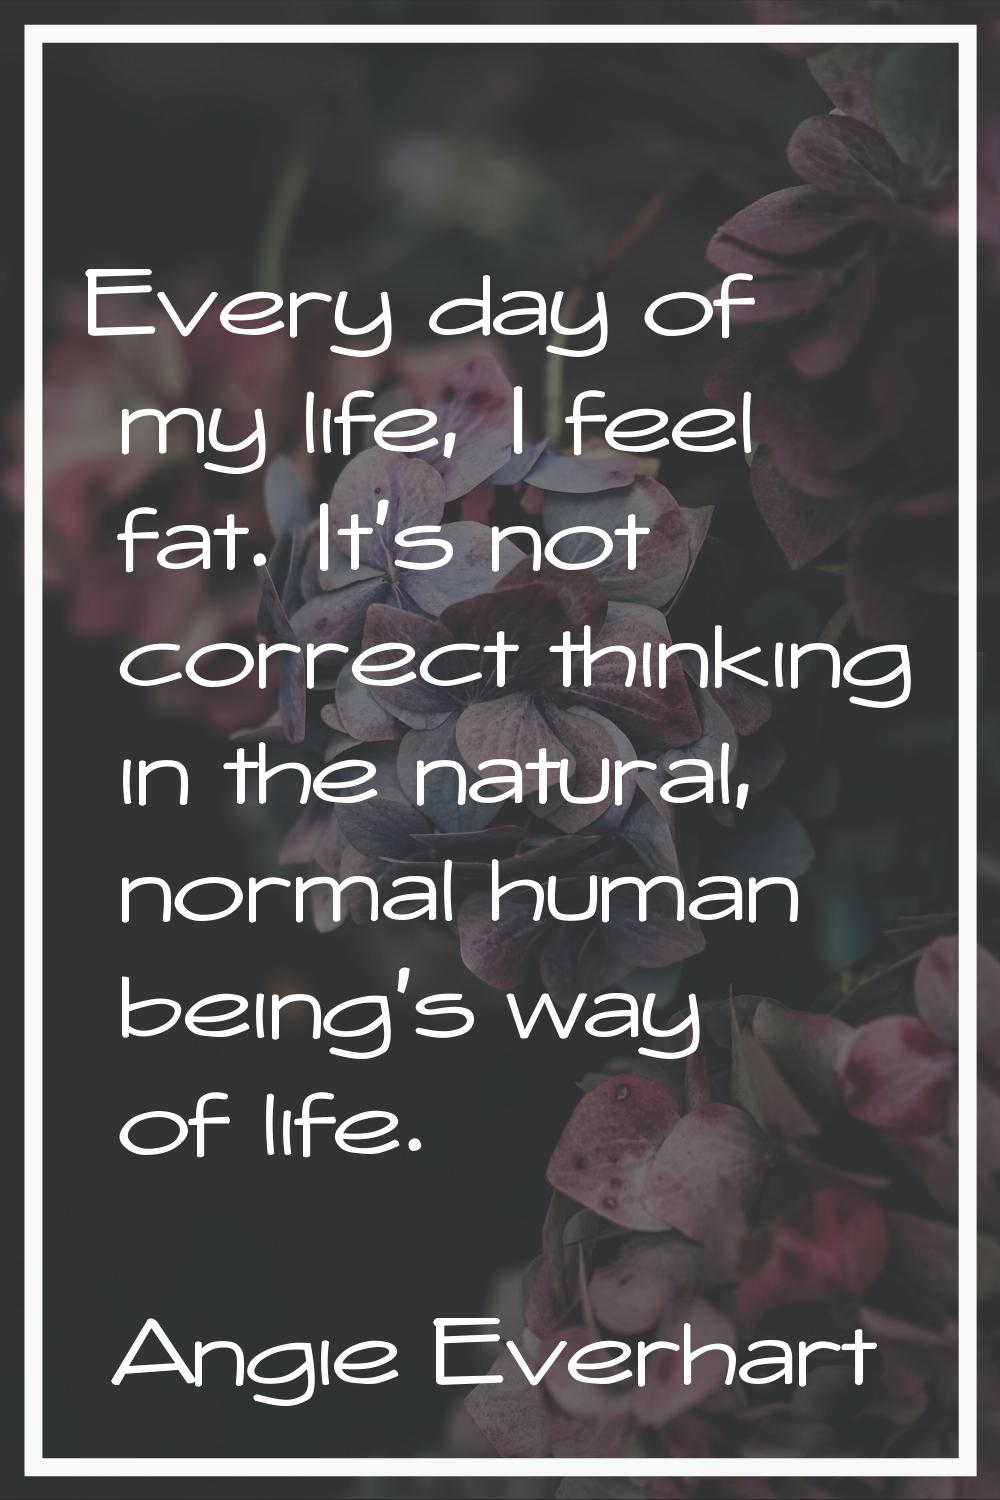 Every day of my life, I feel fat. It's not correct thinking in the natural, normal human being's wa